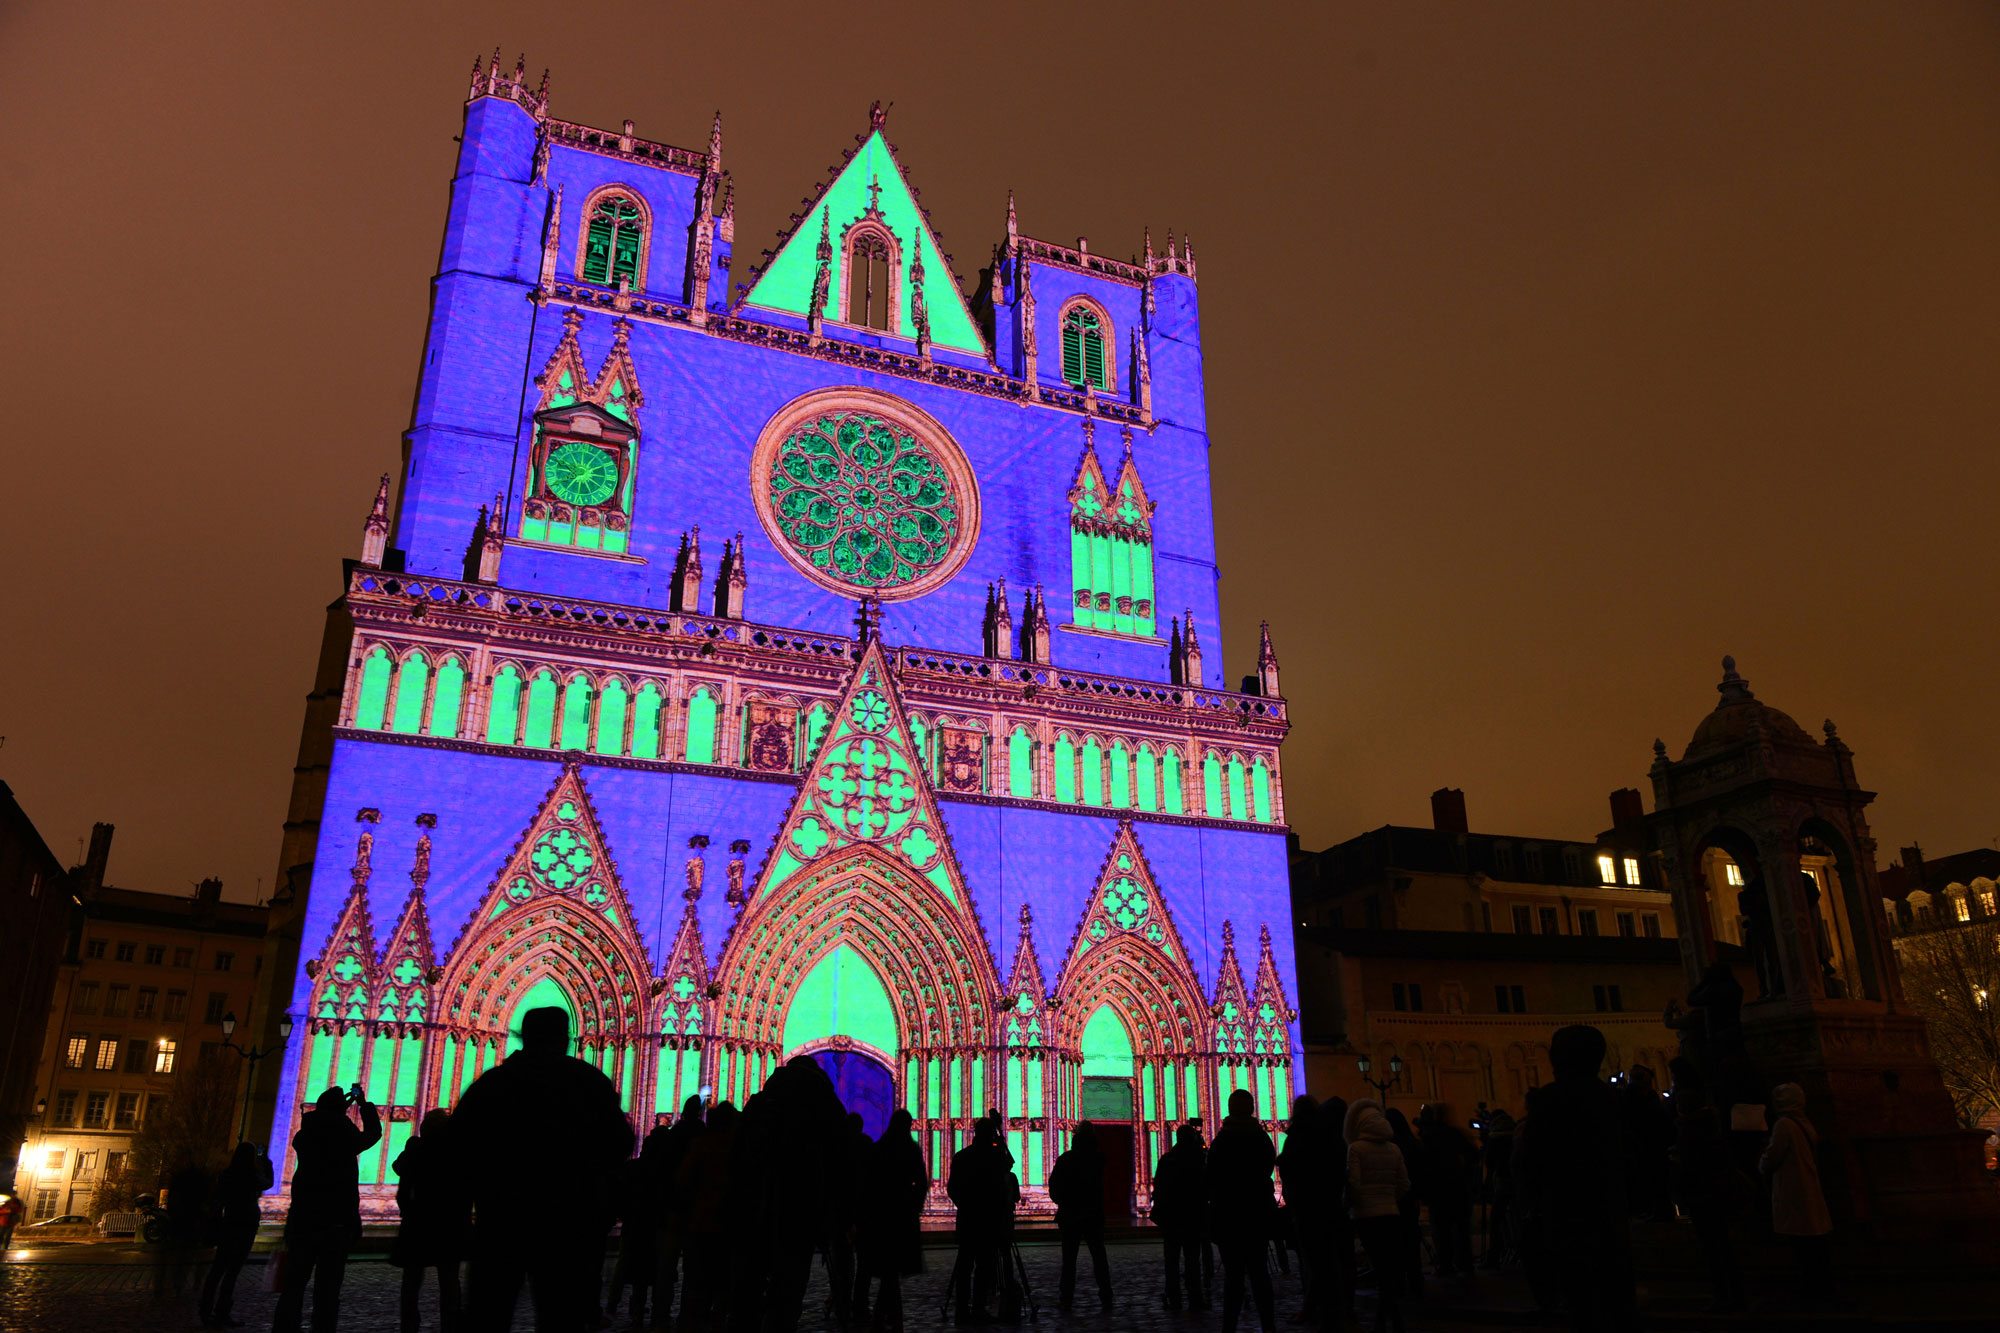 The Festival of Lights or Fete des Lumieres in Lyon in December